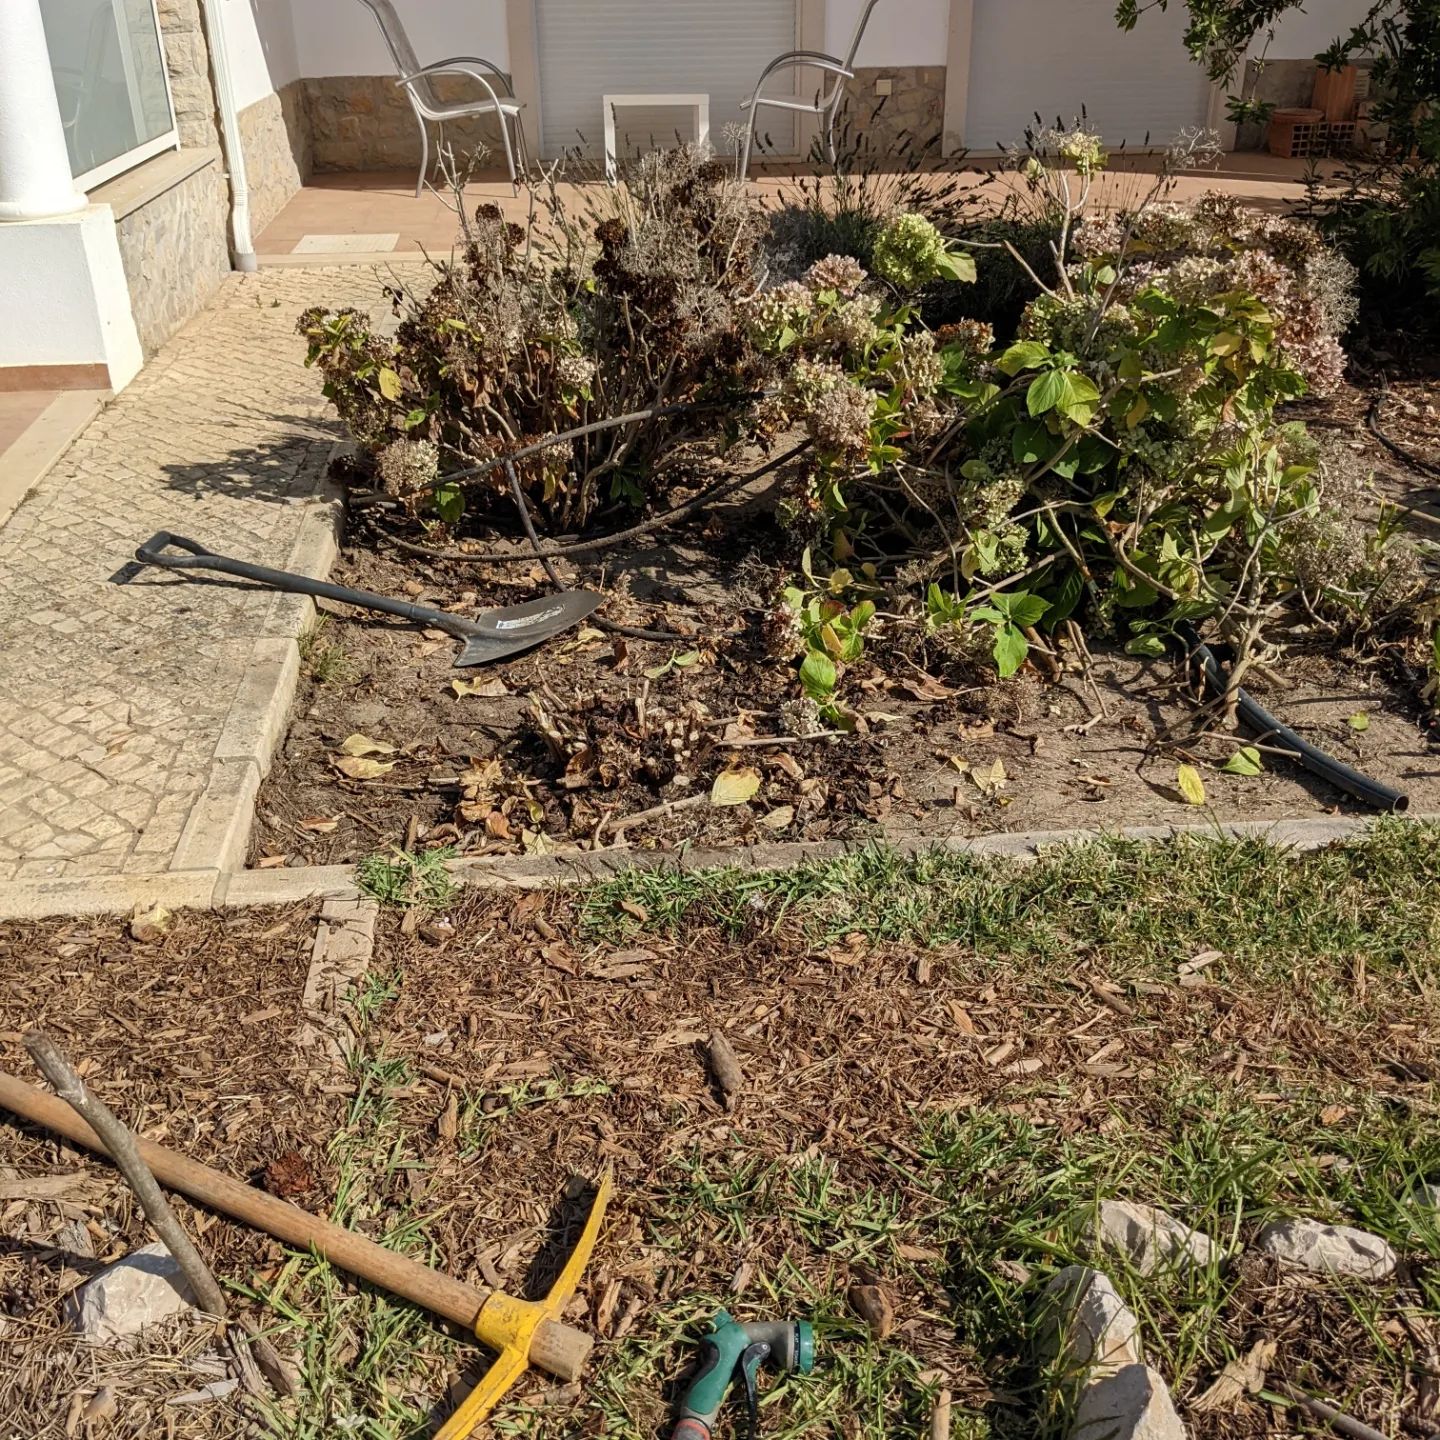 Removing some hortênsias next to the house to make room